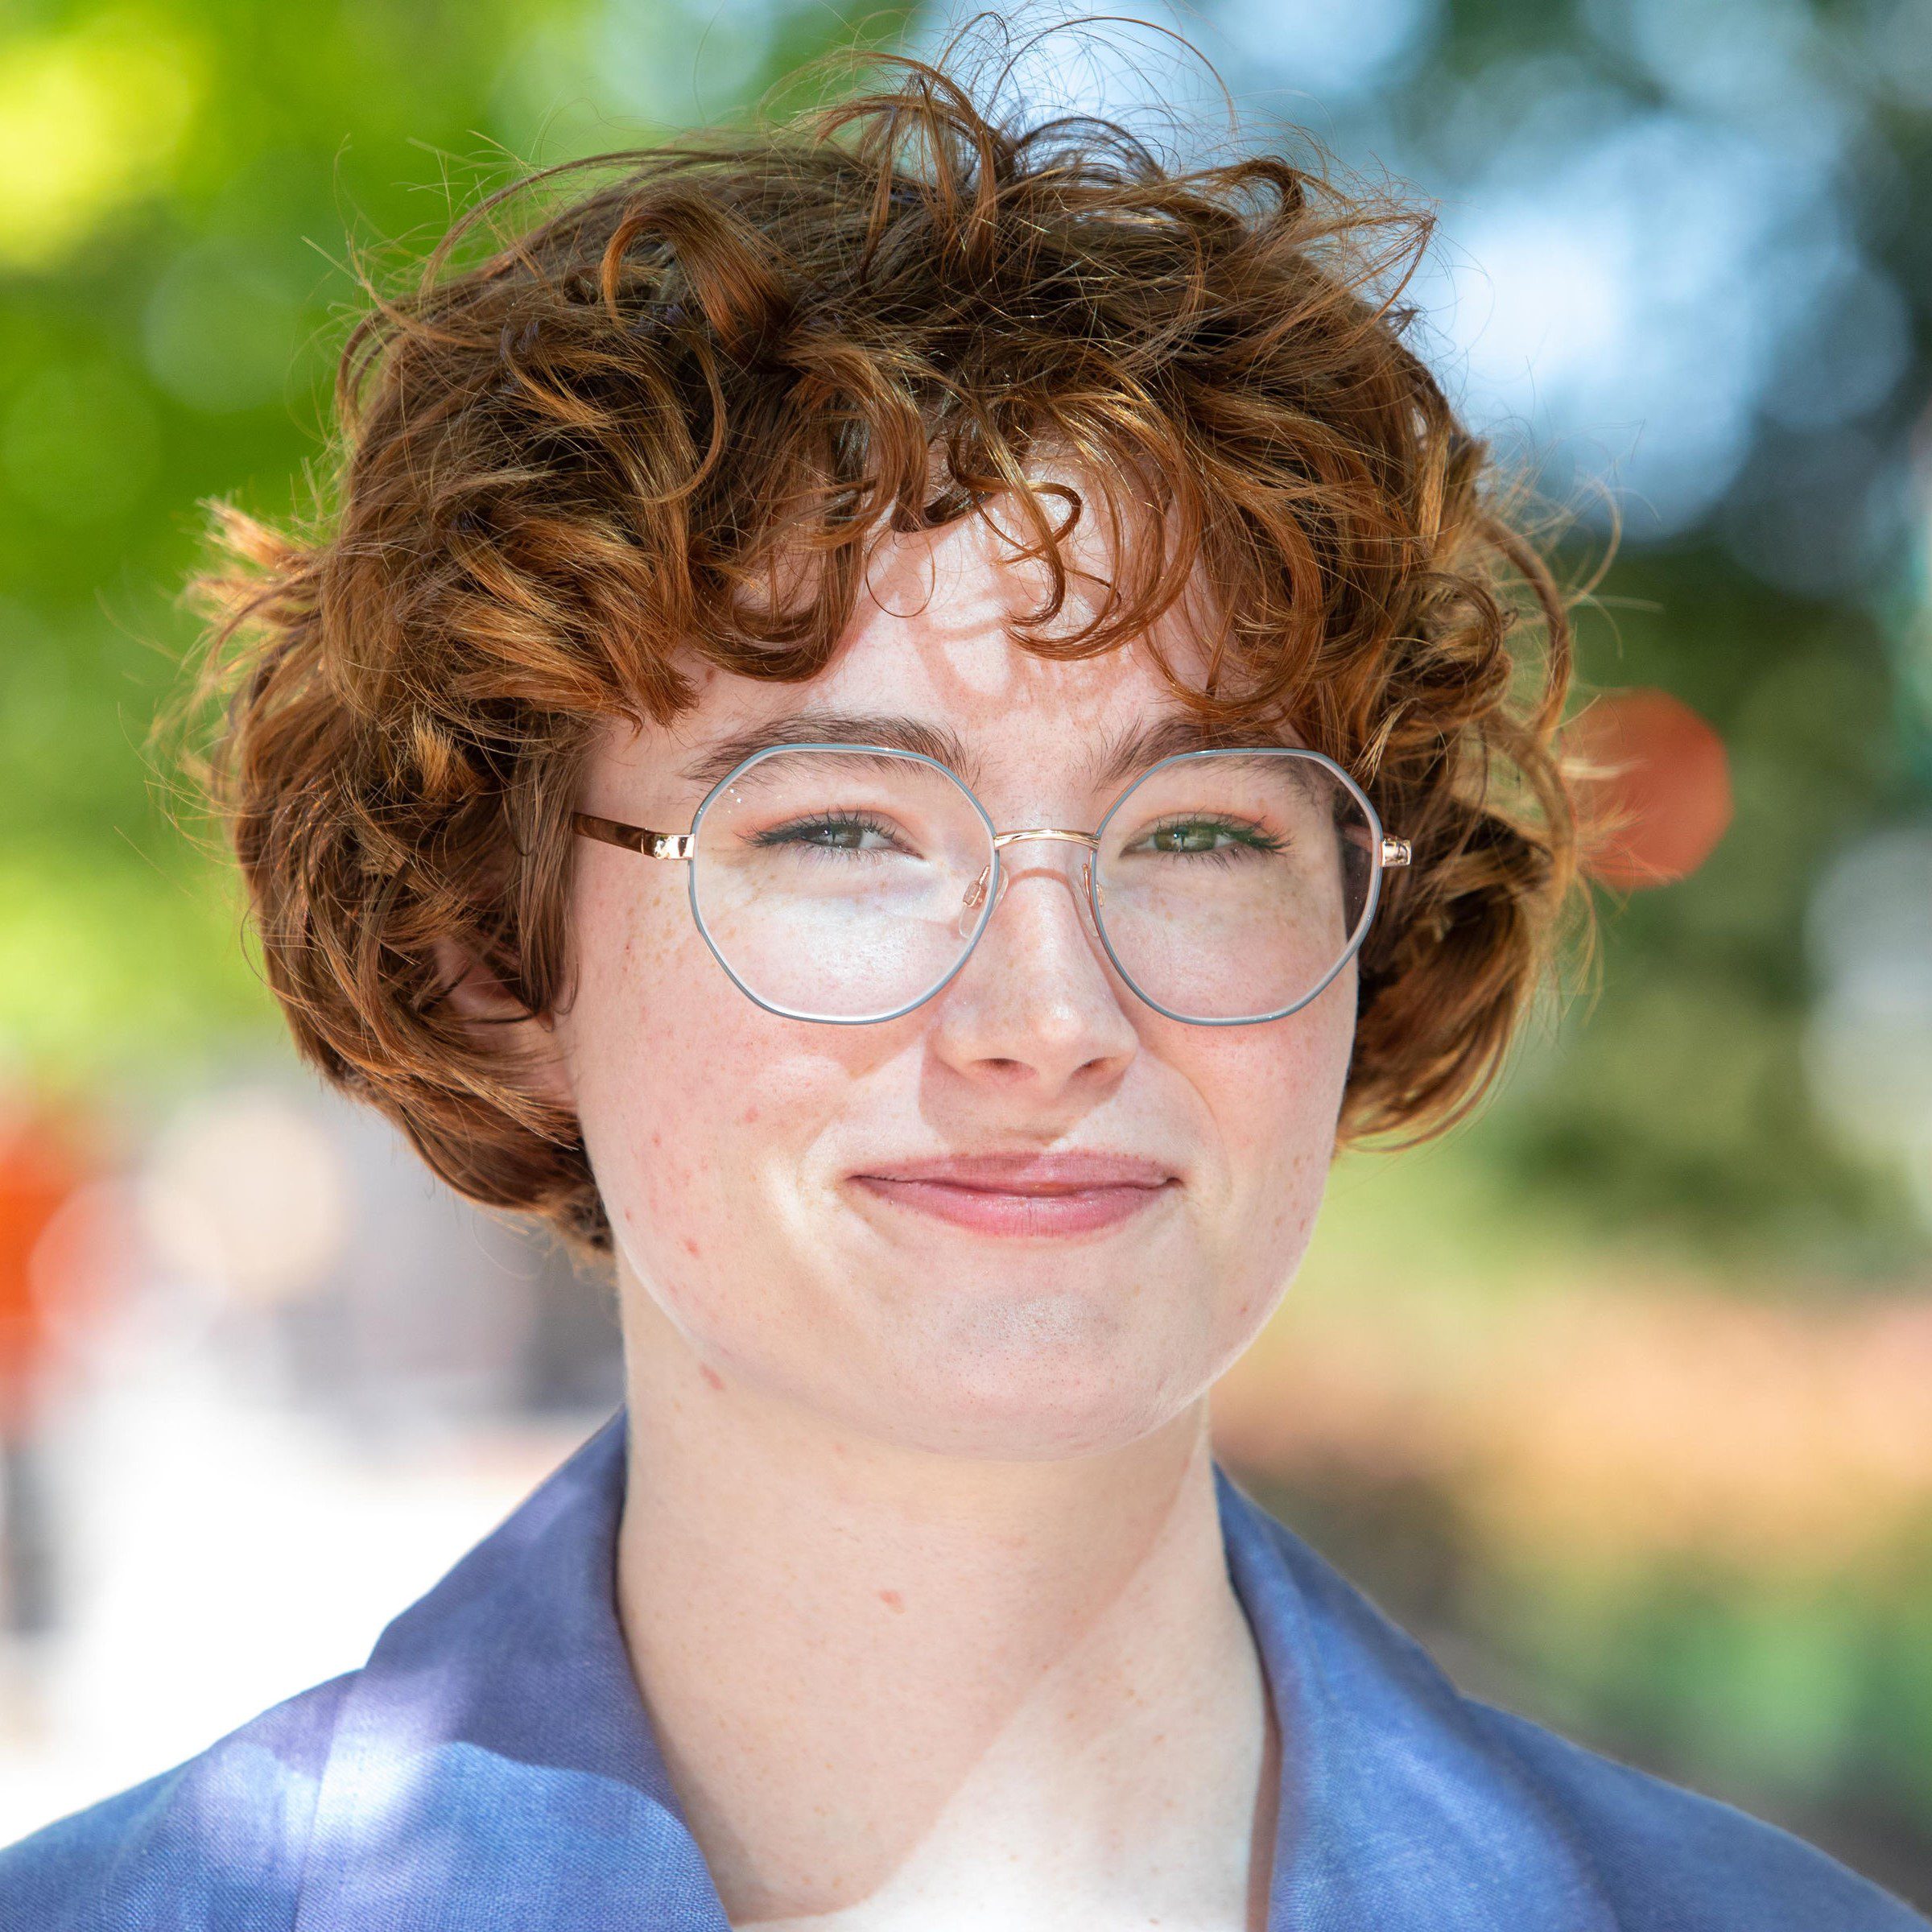 Photo of Bex Heimbrock from the shoulders up, facing the camera wearing a blue collared shir at round rimmed glasses.